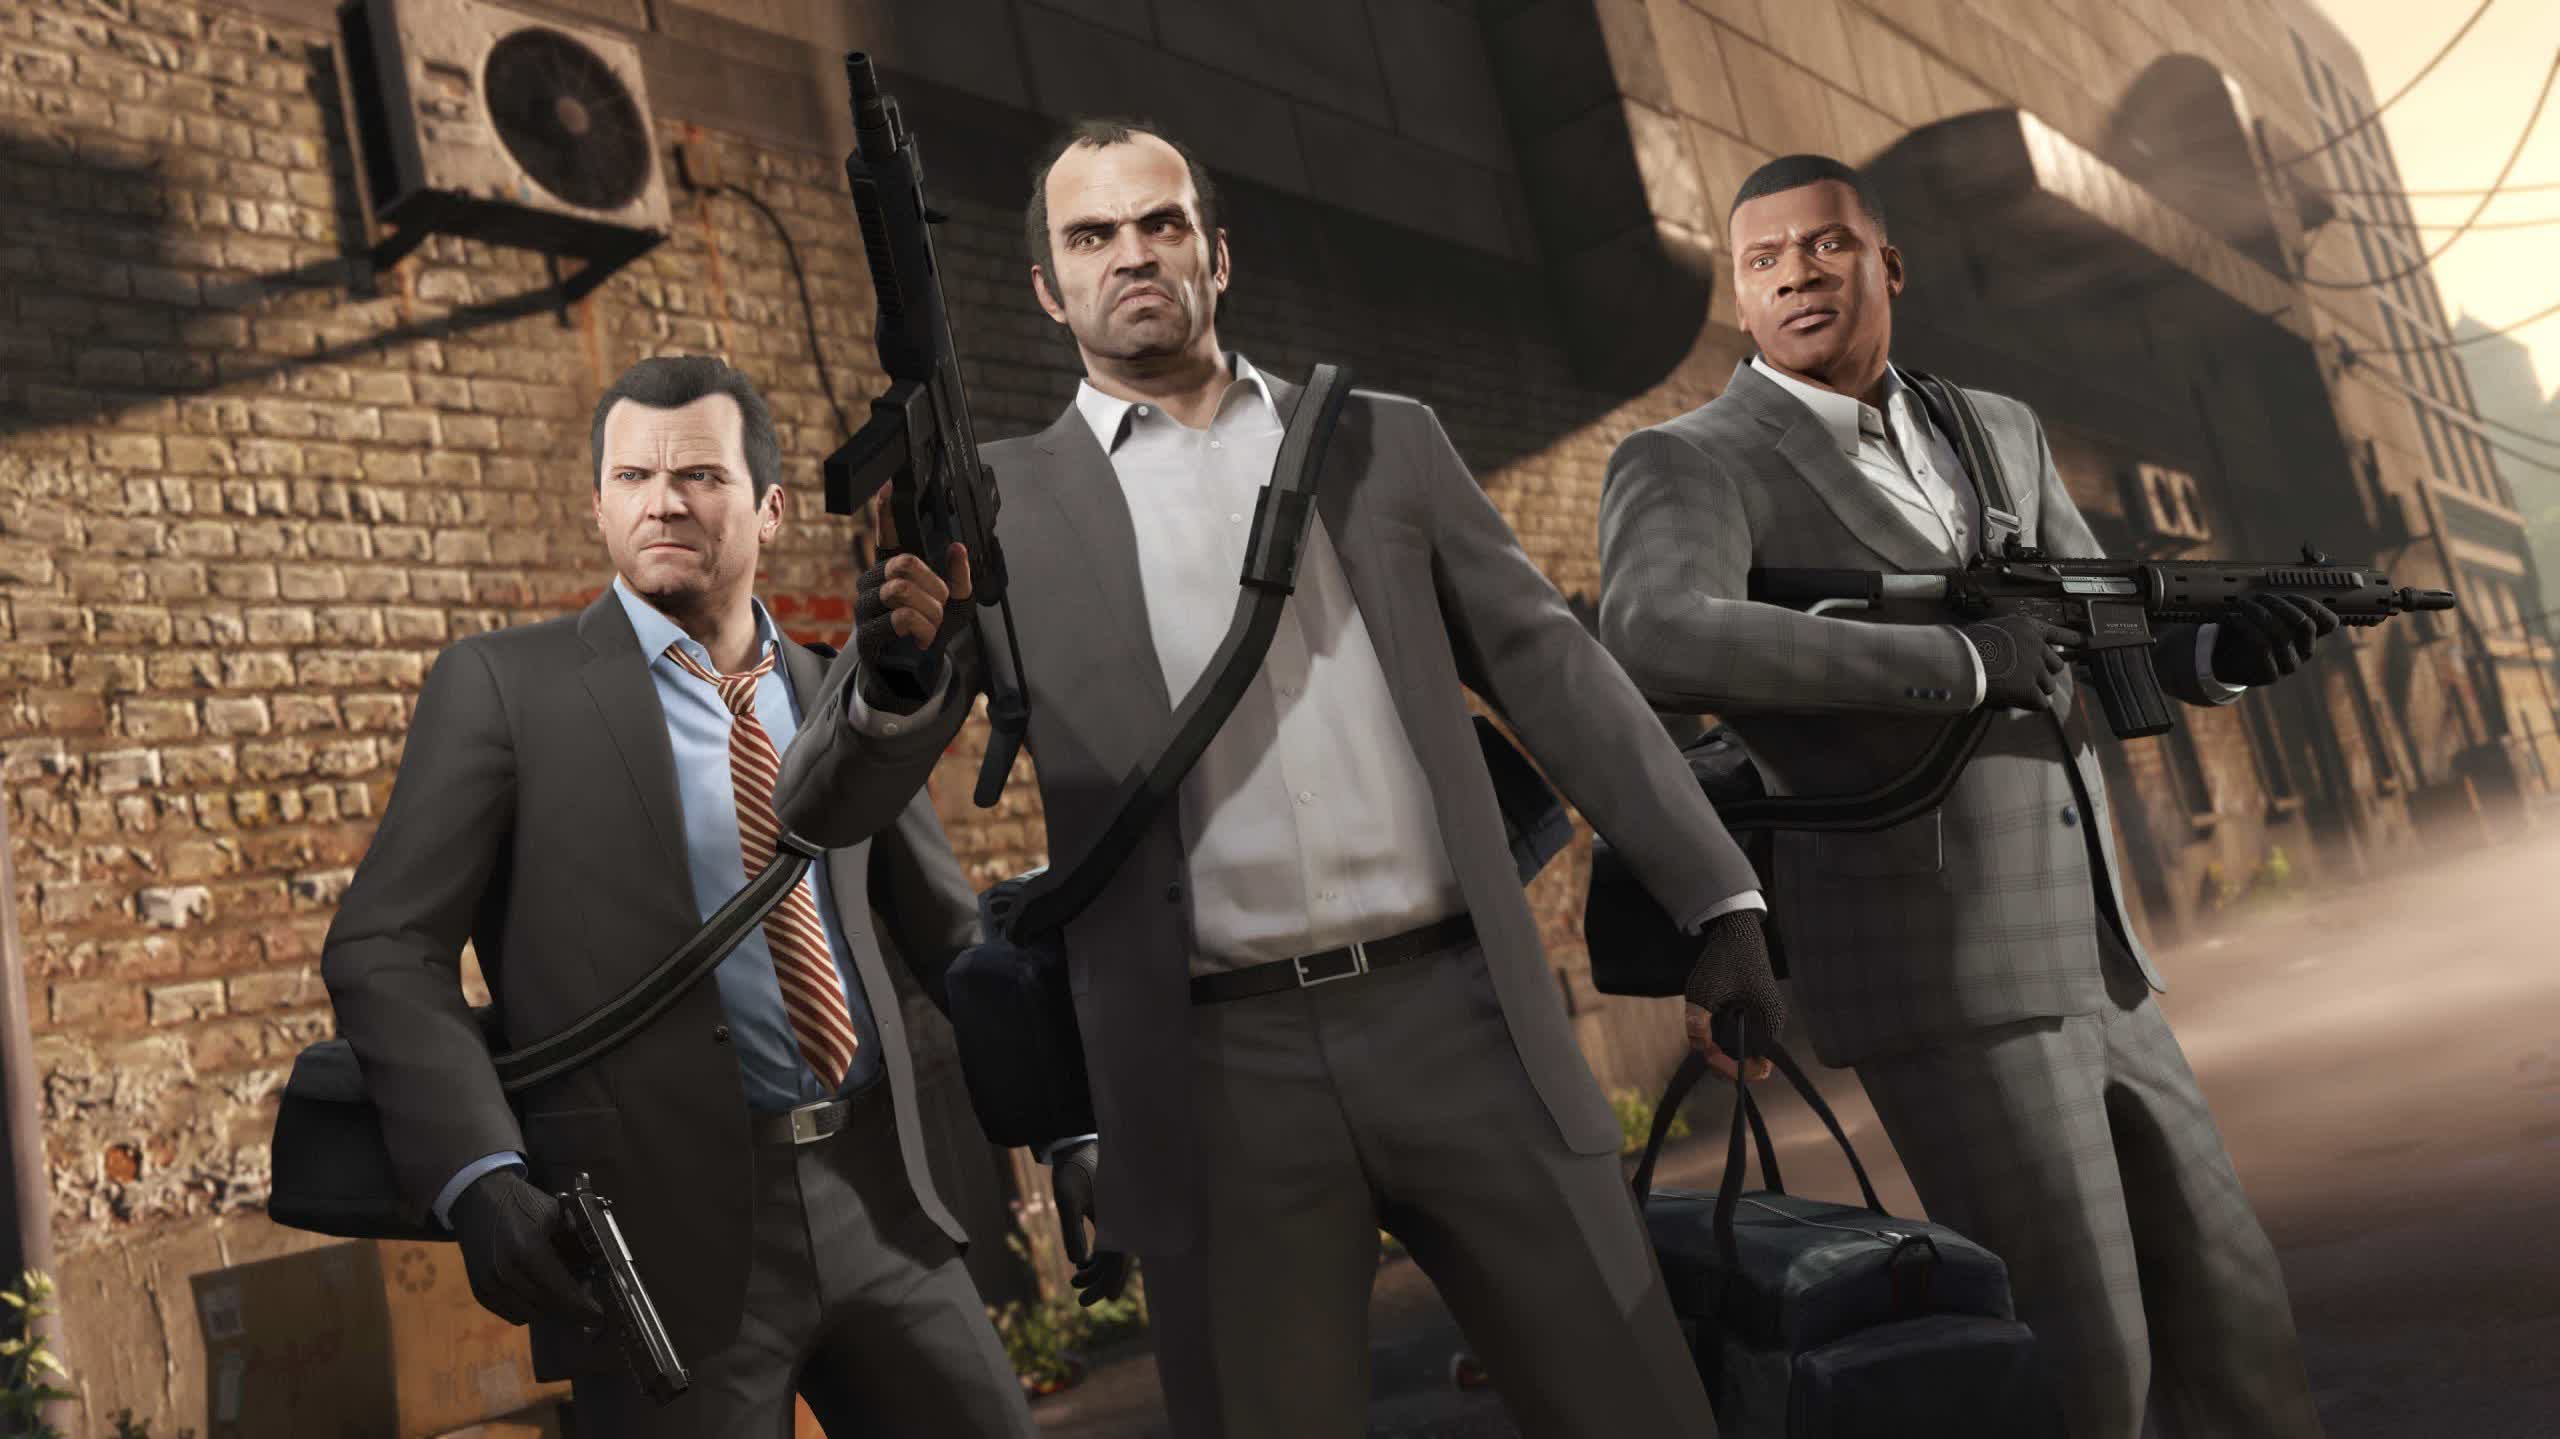 Rockstar shares details on GTA V, GTA Online PS5 and Xbox Series versions